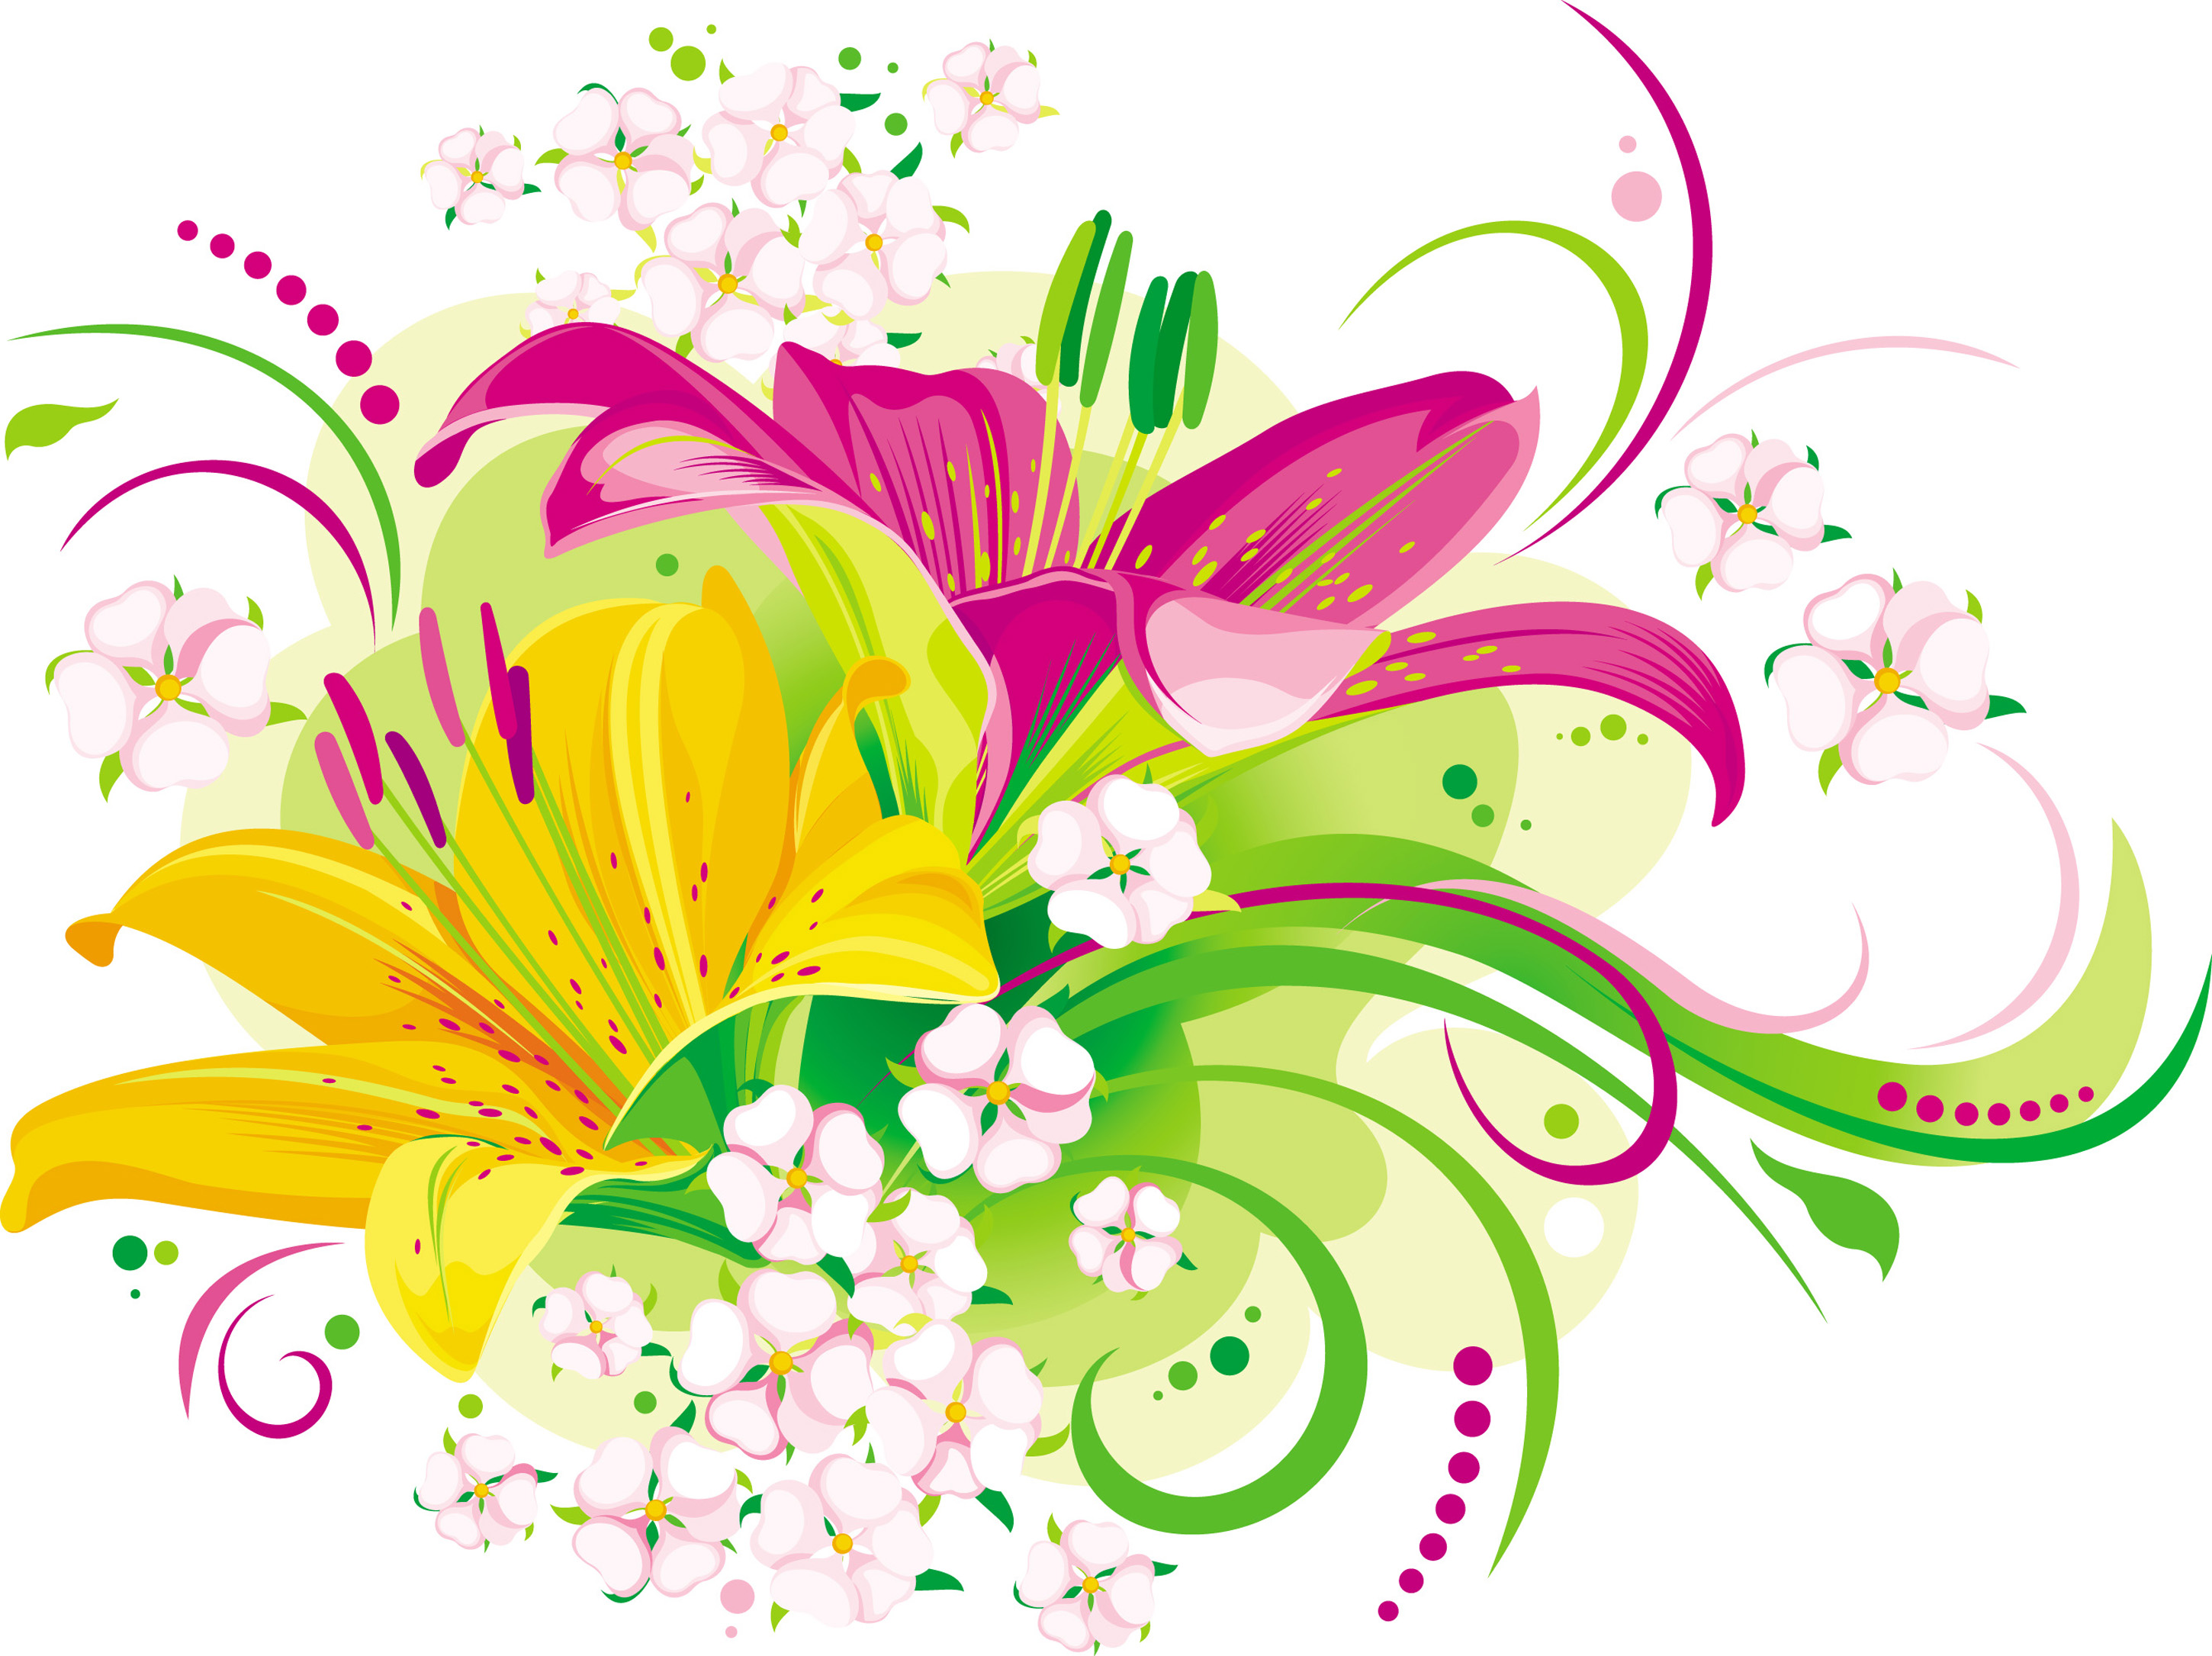 flowers clipart free download - photo #23